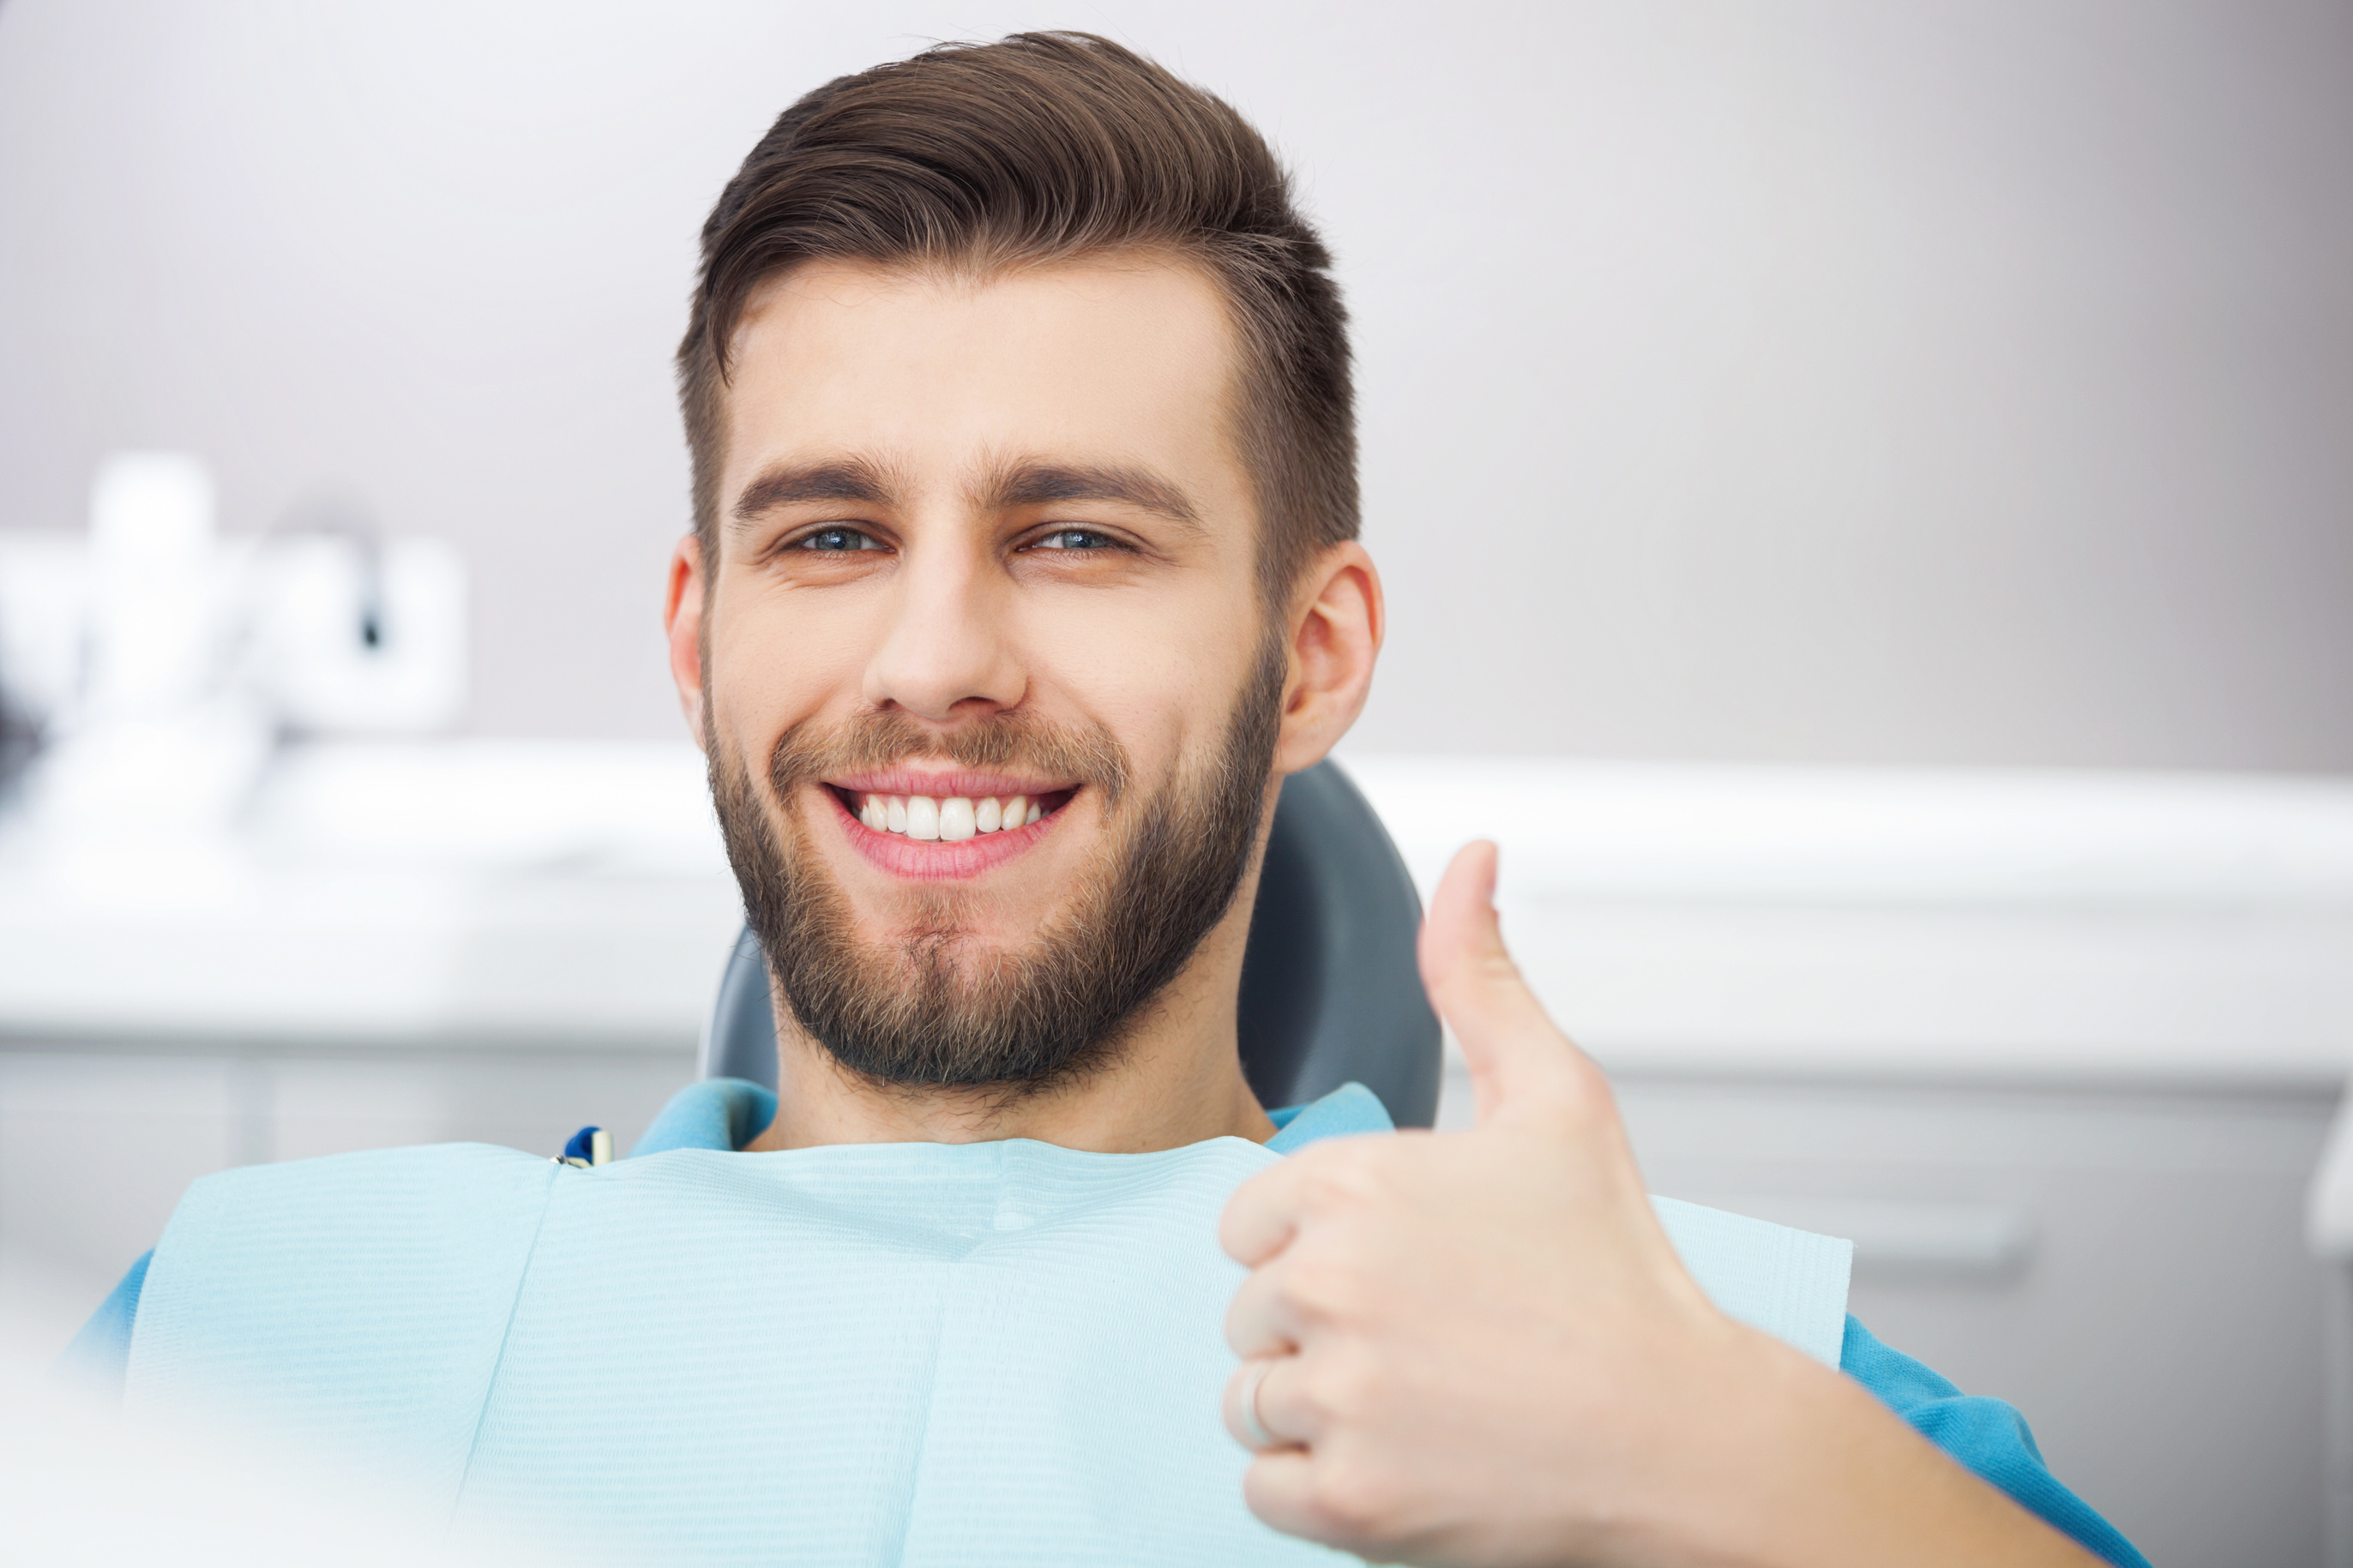 Where can I find a Rancho Cucamonga emergency dentist?